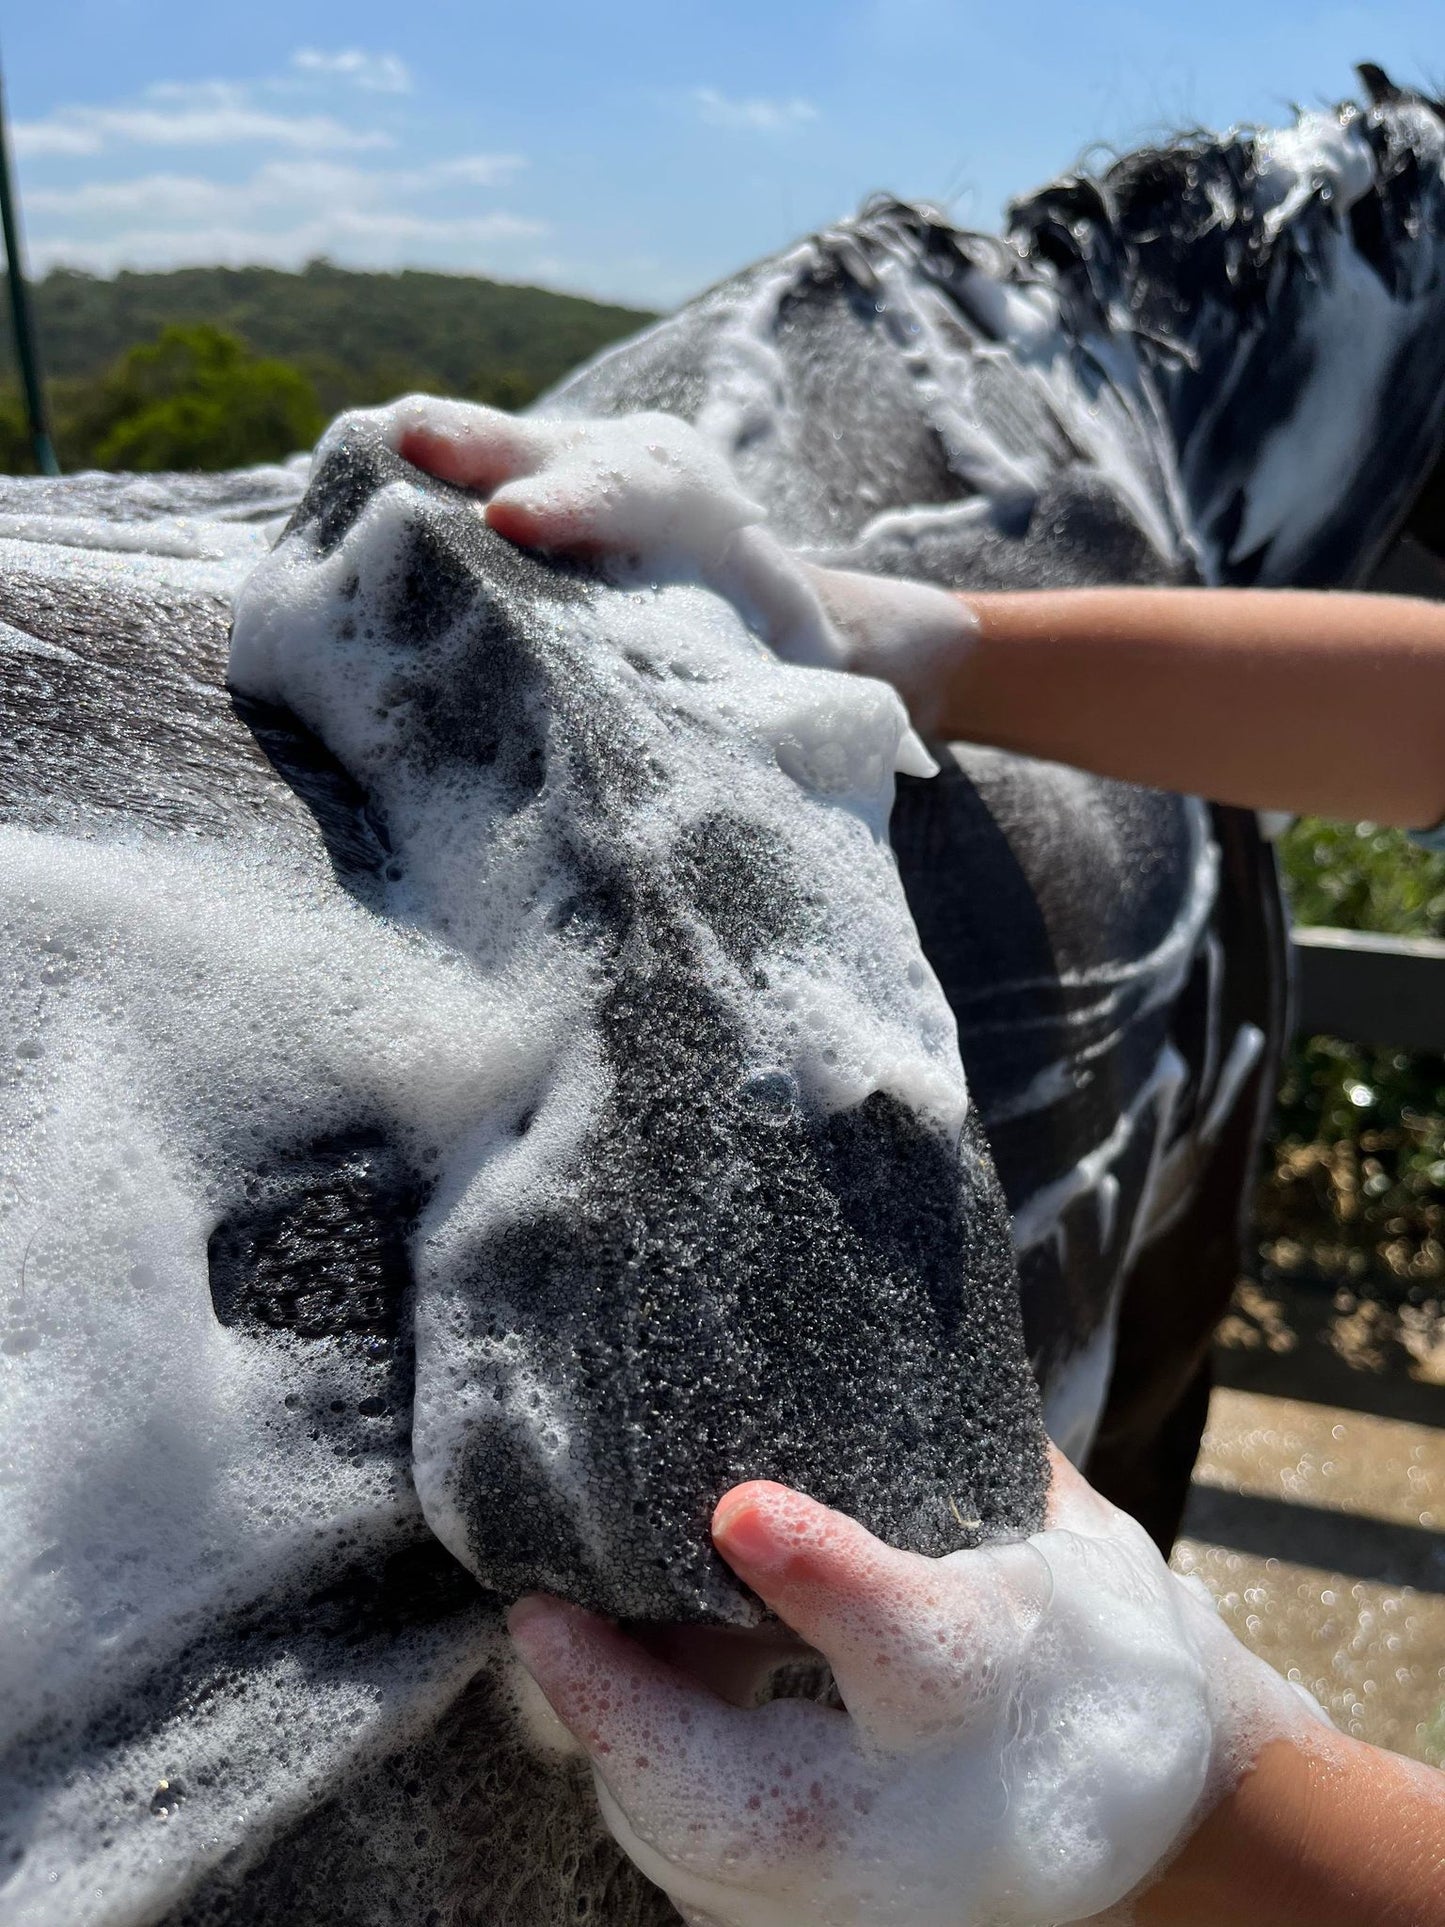 A photo of the Hairy Pony Compressed Scrubbing Horse Sponge after expanding with water. A black, coarse sponge being used to spread shampoo on a horse's coat.